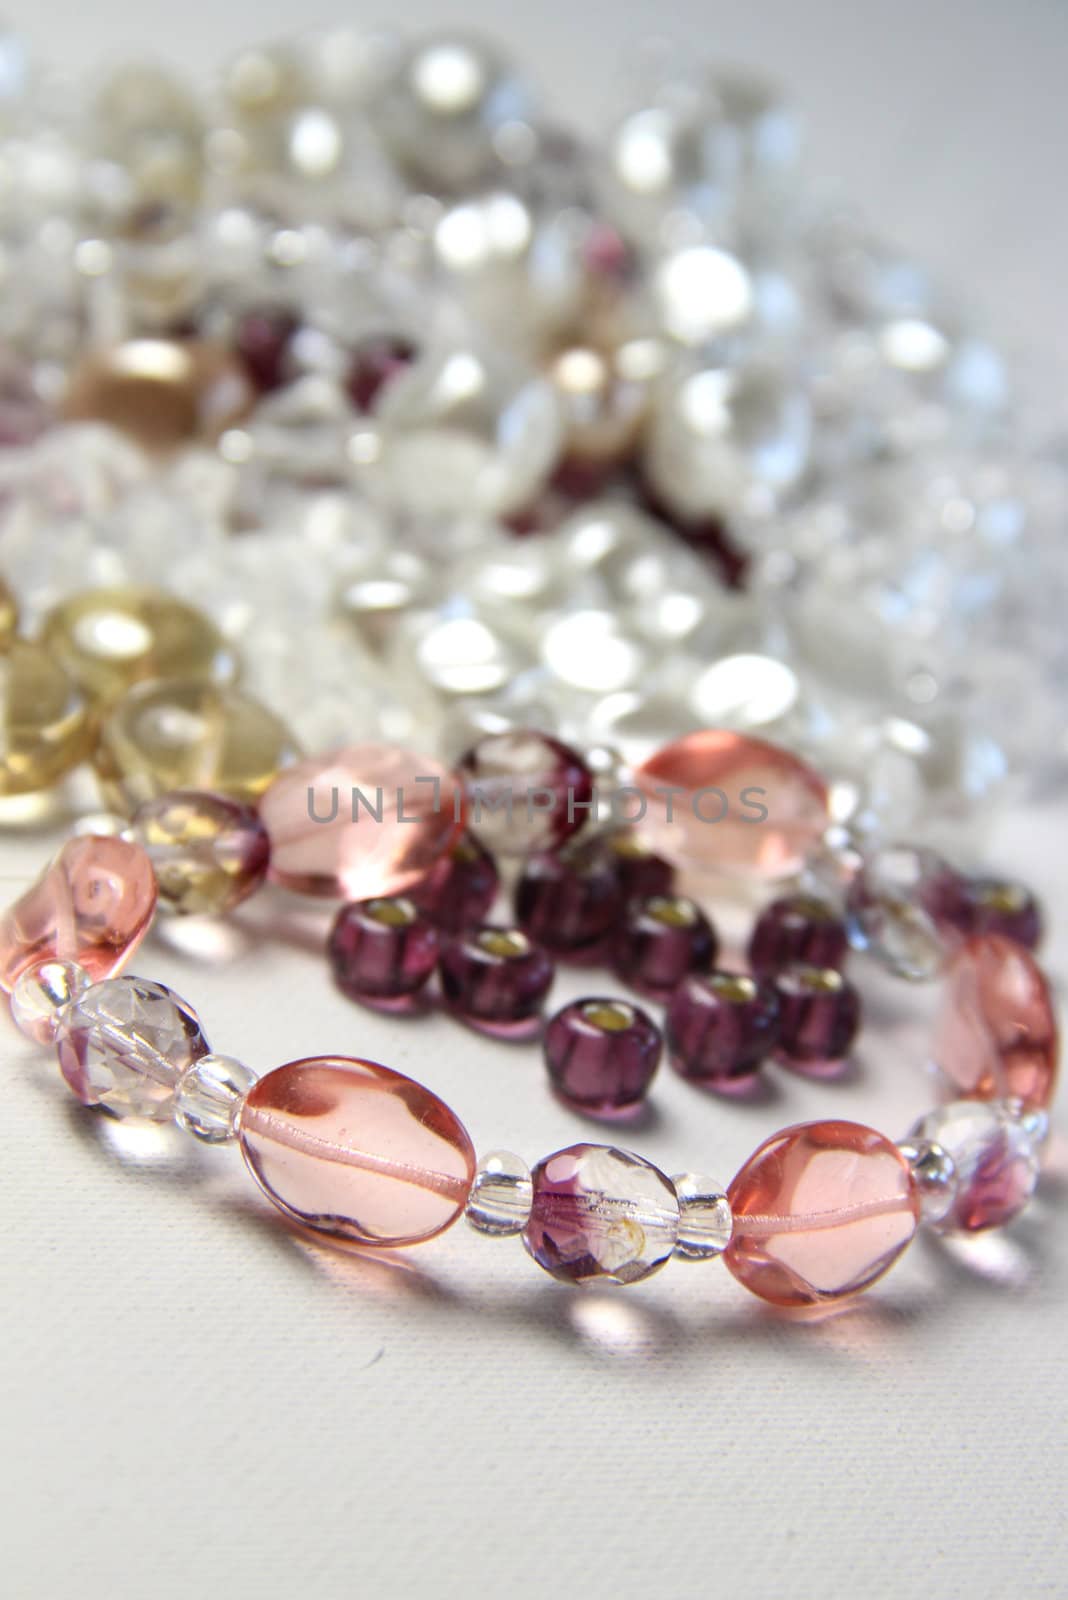 Big mix of beads and crystals for handmade bracelet knitting